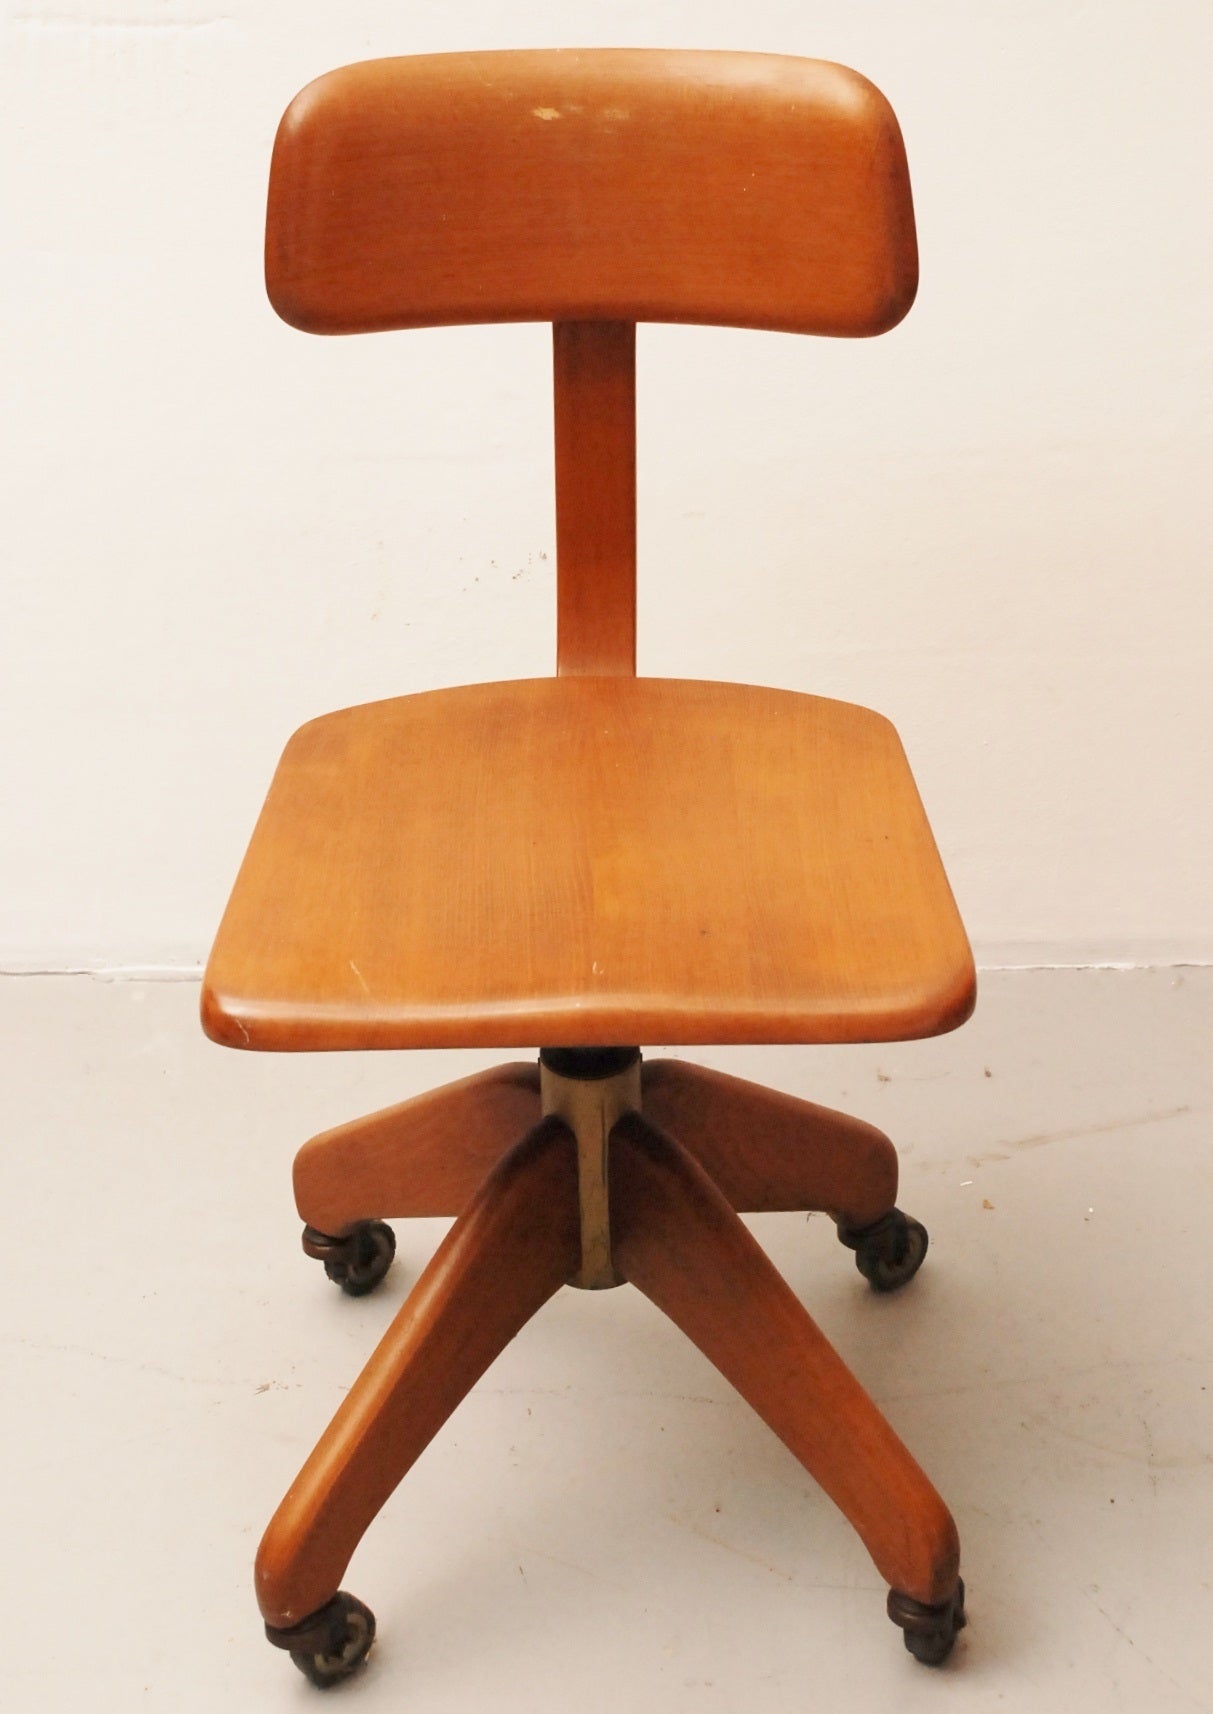 Very rare industrial, solid beech chair. With adjustable seat and rubber wheels. The chair is working and complete.